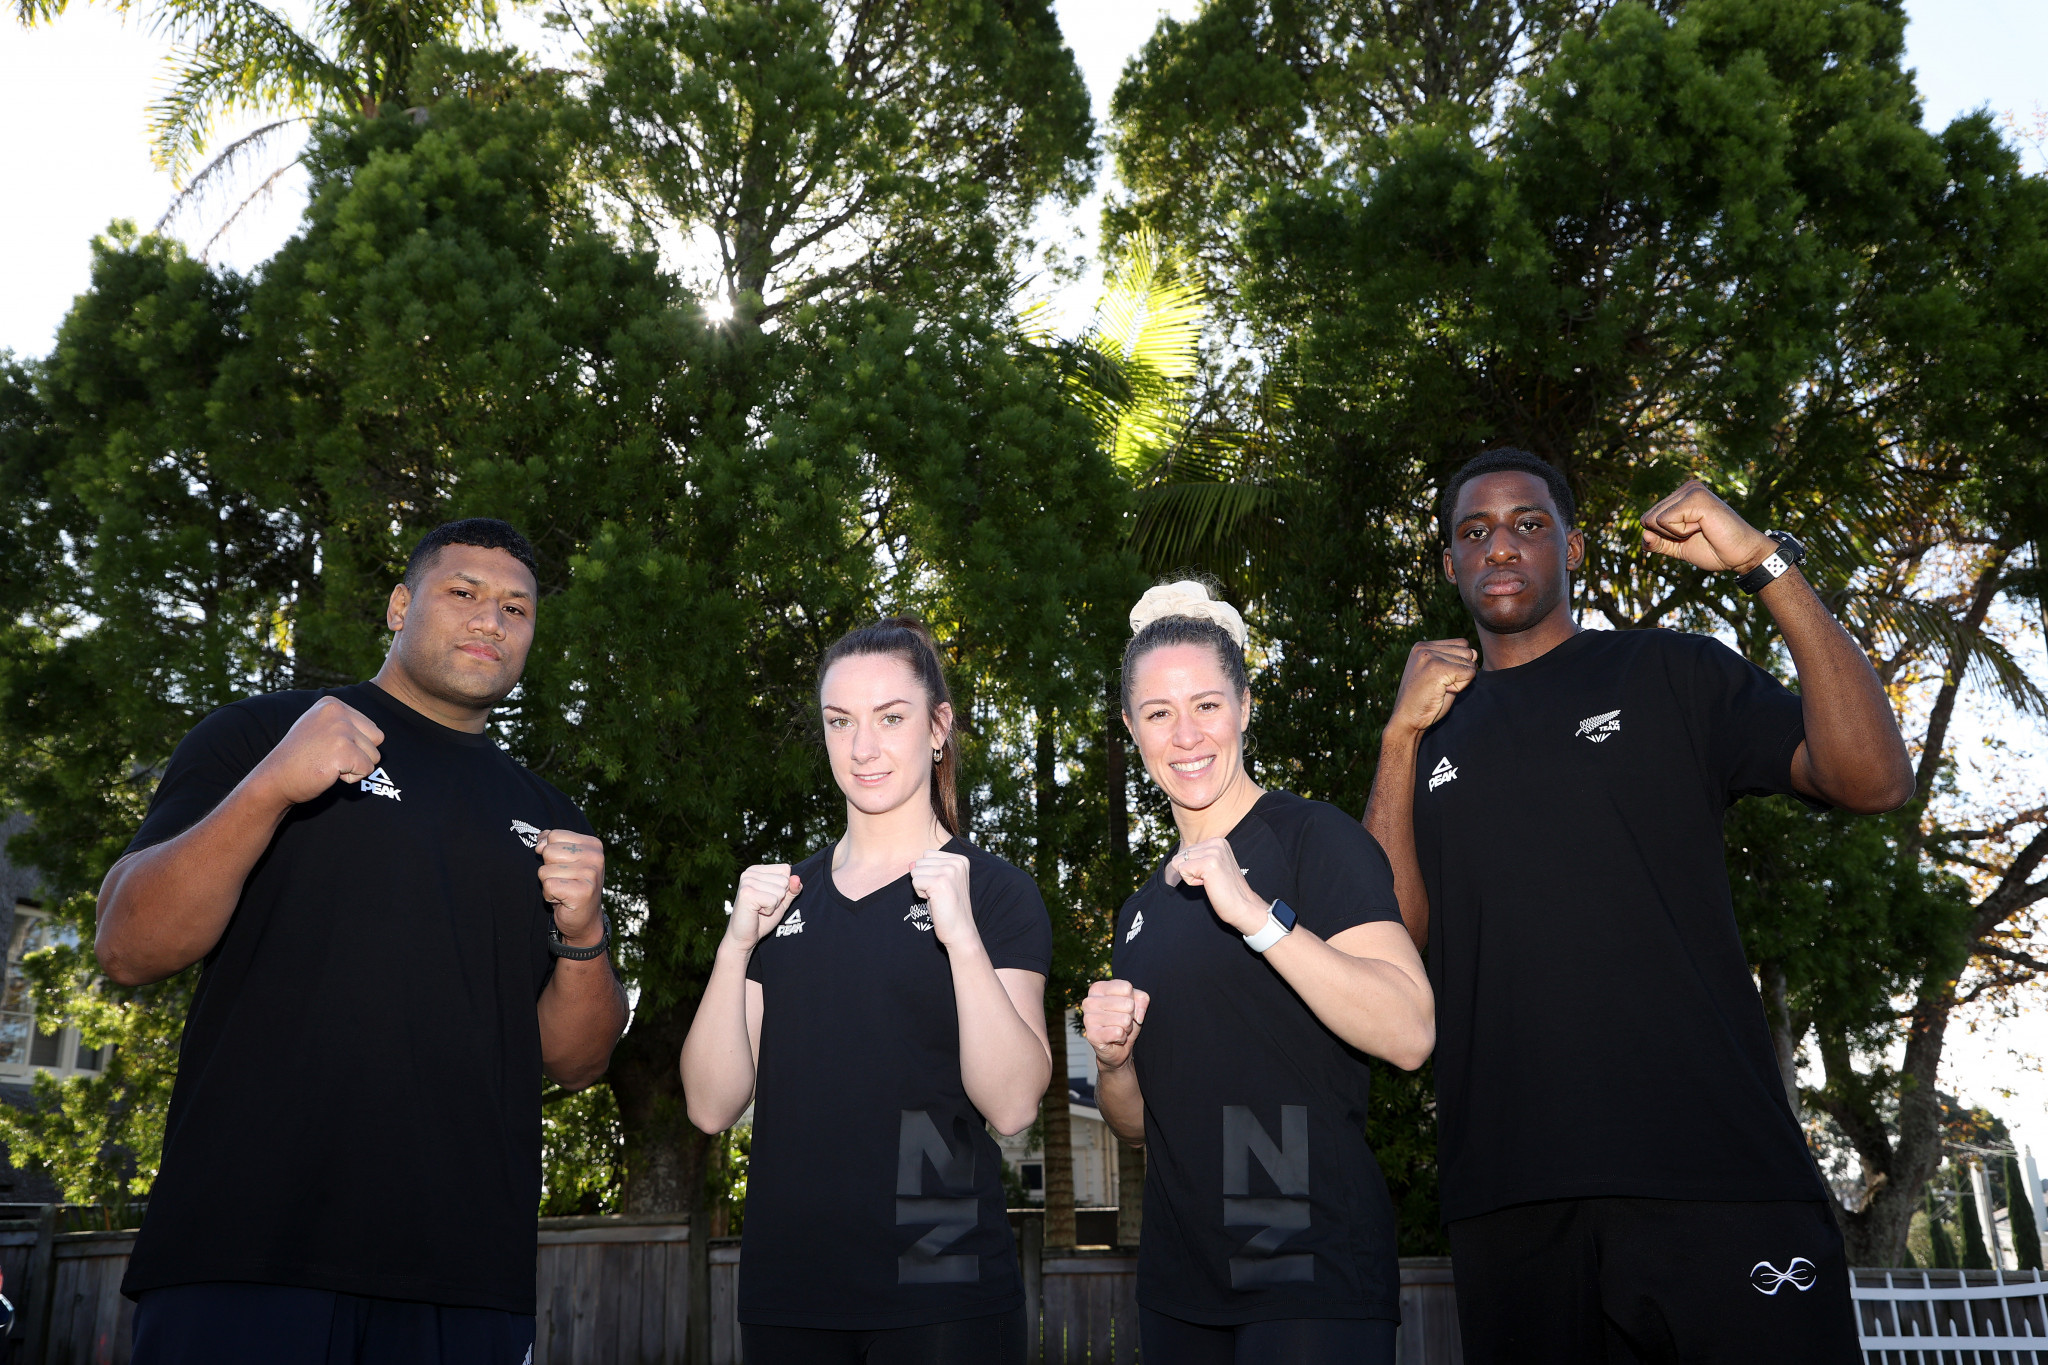 Boxing New Zealand has permitted athletes to attend this month's IBA Women's Boxing World Championships, but will not allow this for the Men's World Championships ©Getty Images